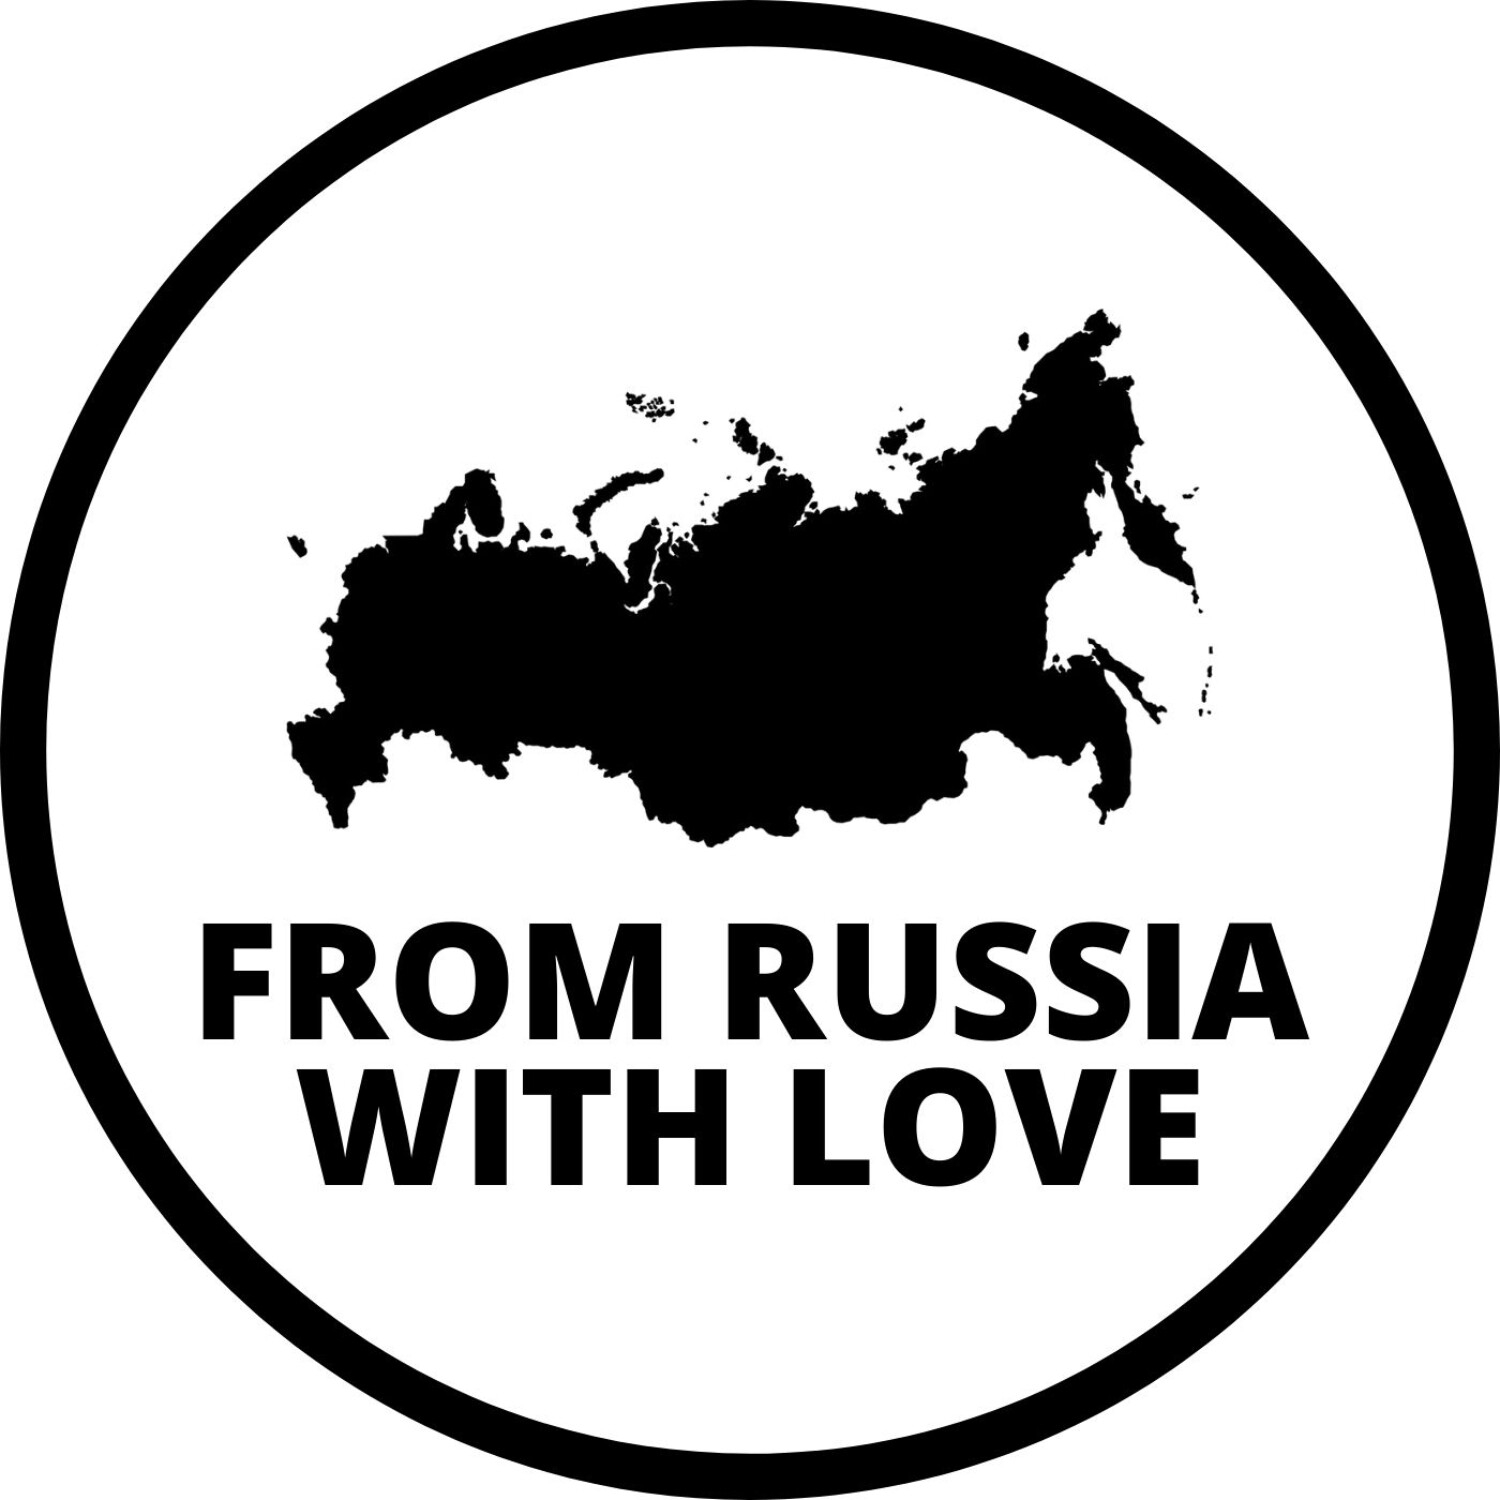 From Russia with love; stereotypes 181029FROMRUSSIAWITHLOVE